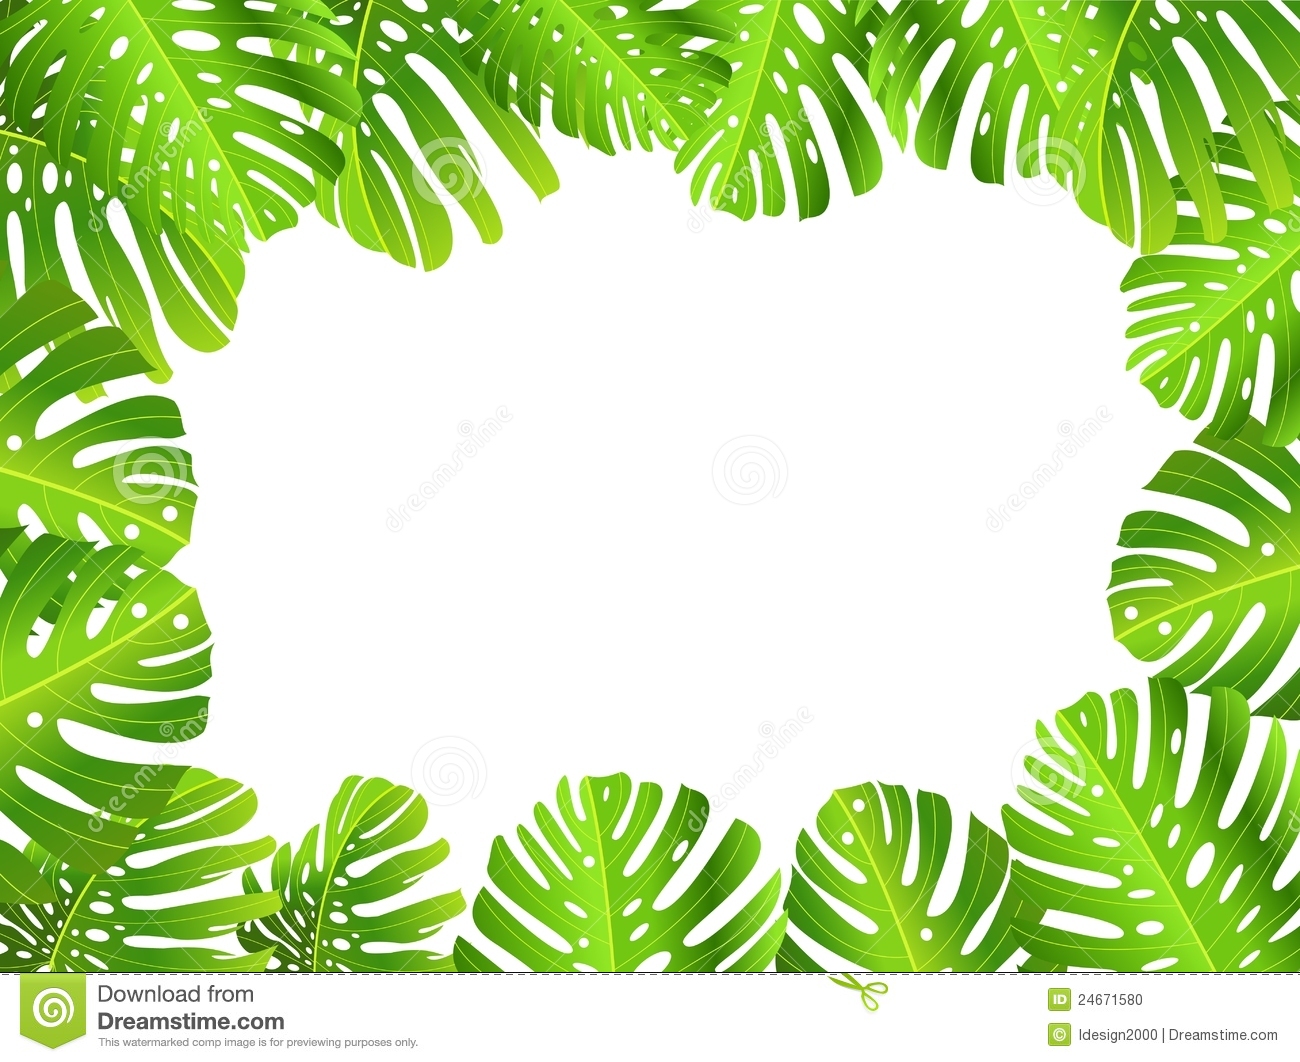 Stock Photo  Tropical Forest Background  Image  24671580